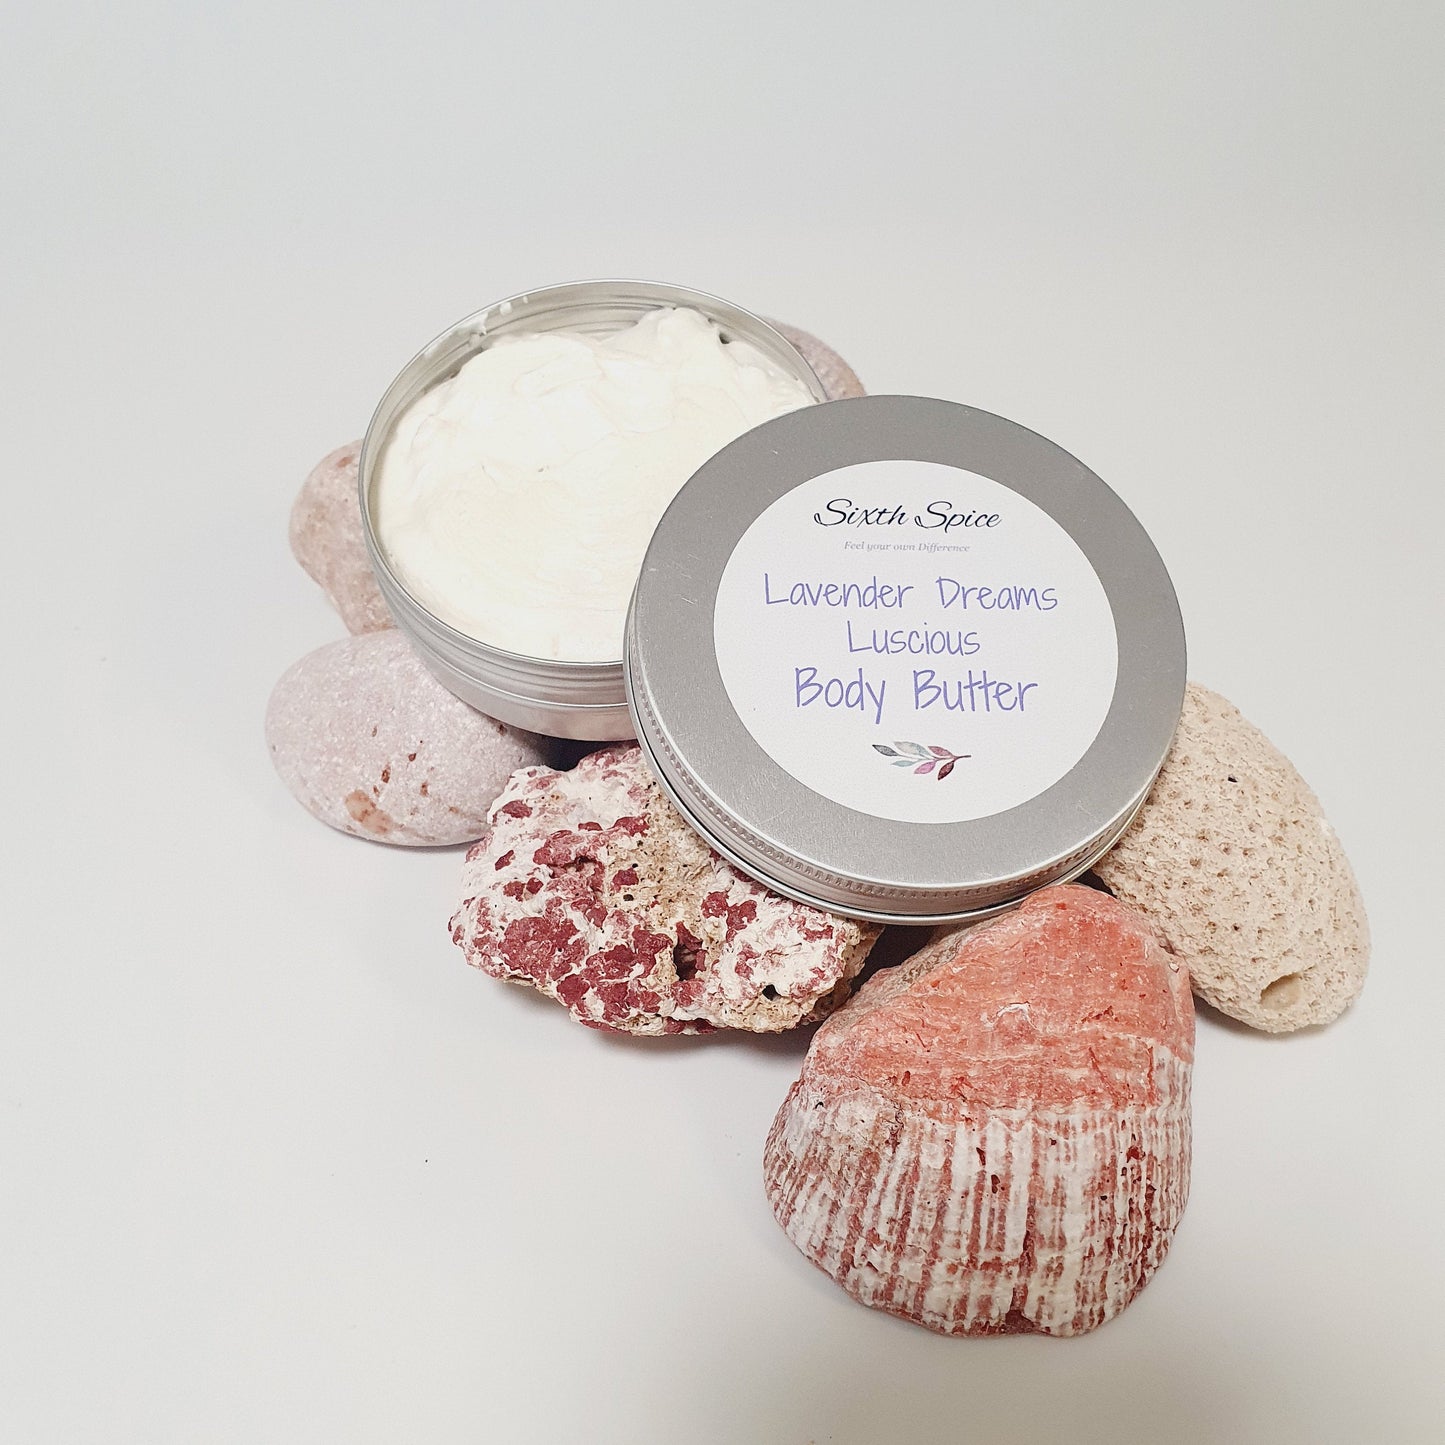 Lavender Dreams scented whipped shea body butter